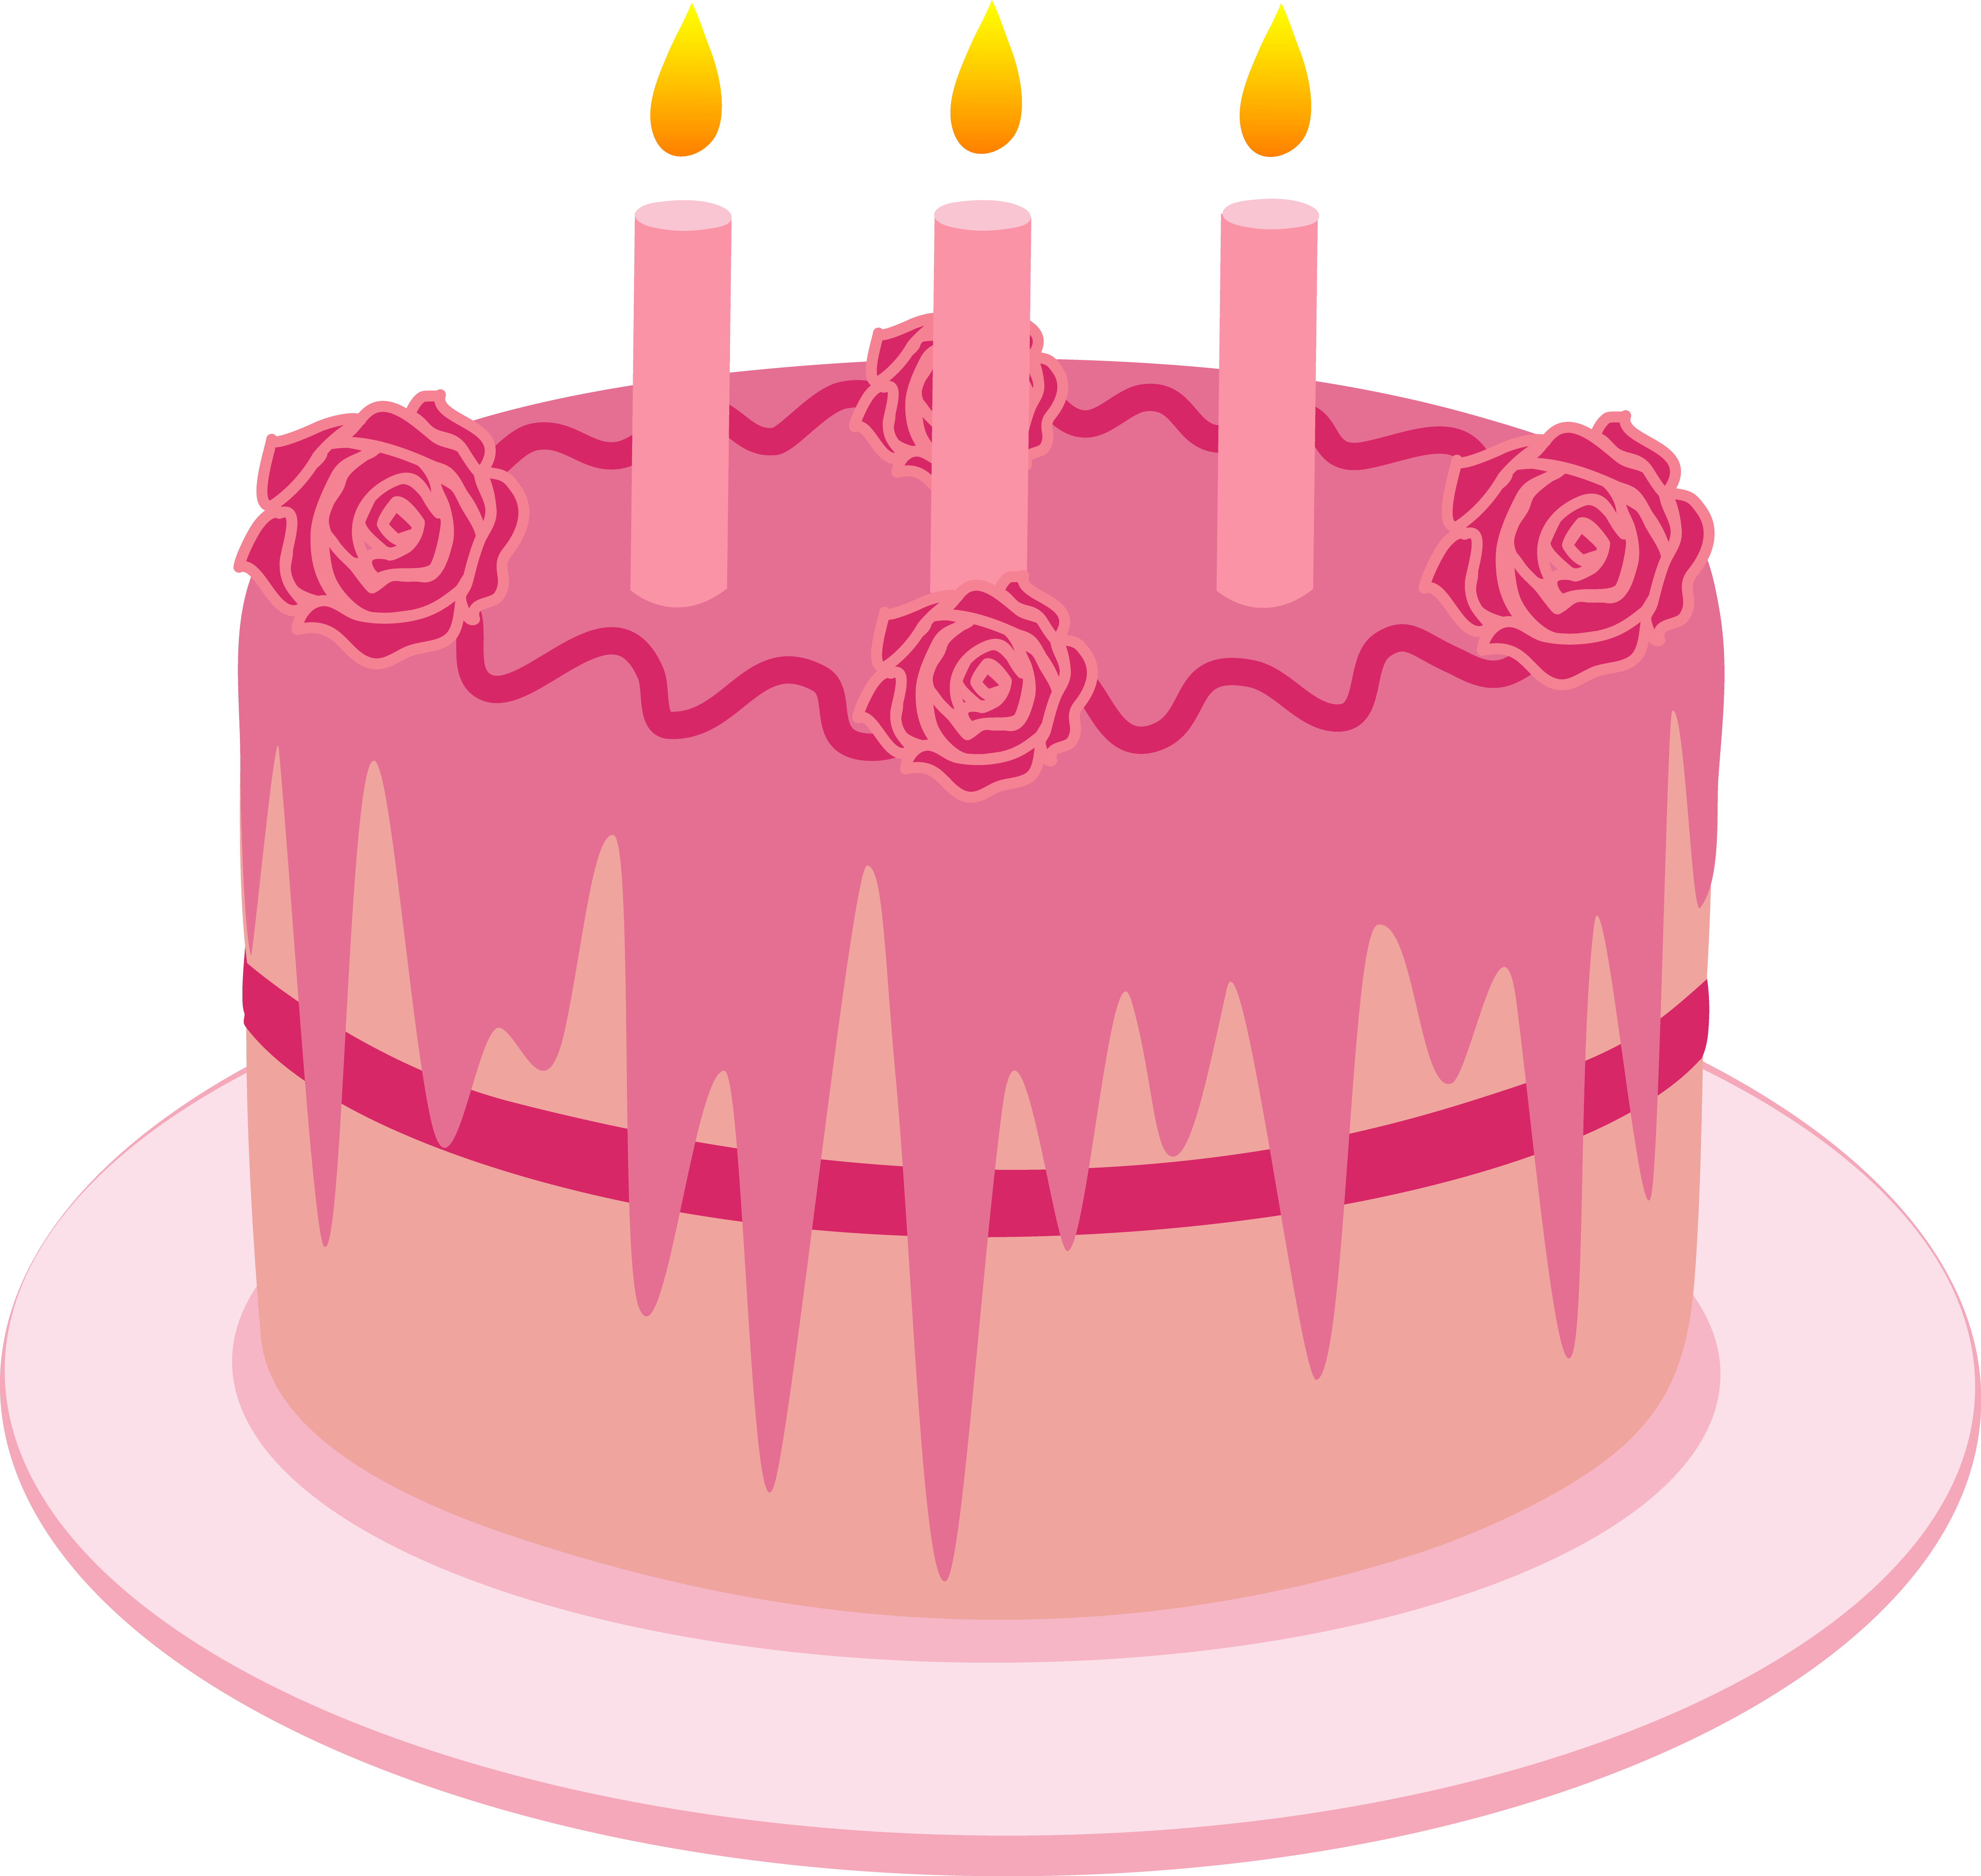 Candles Clipart Free Large Images Birthday Candles